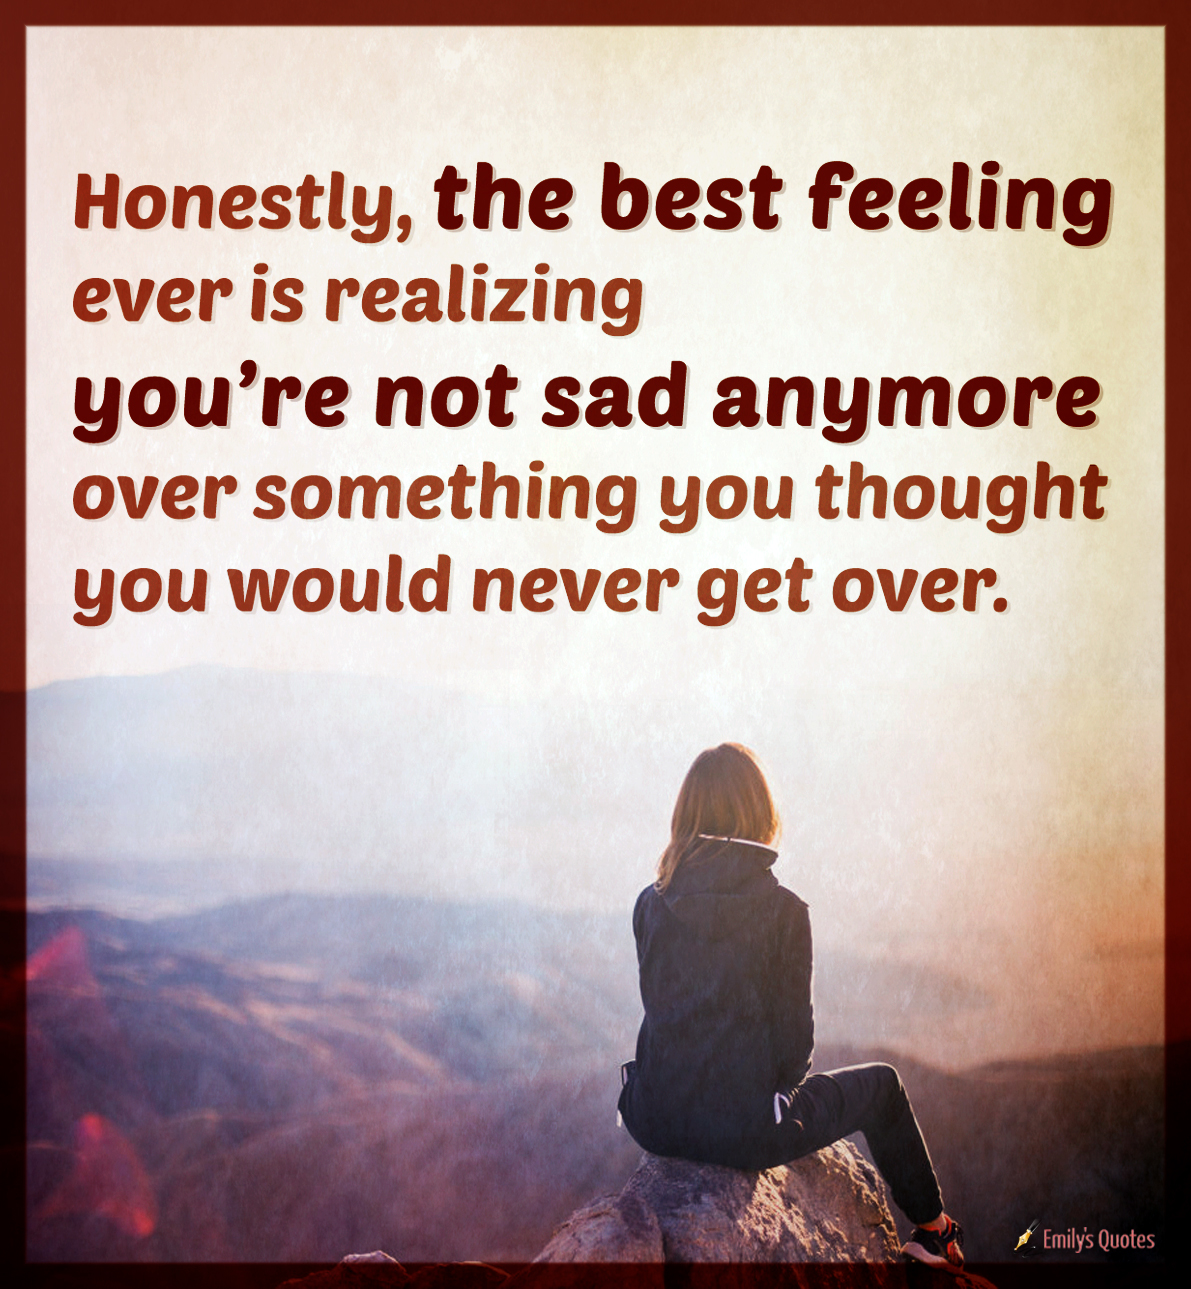 Honestly, the best feeling ever is realizing you’re not sad anymore over something you